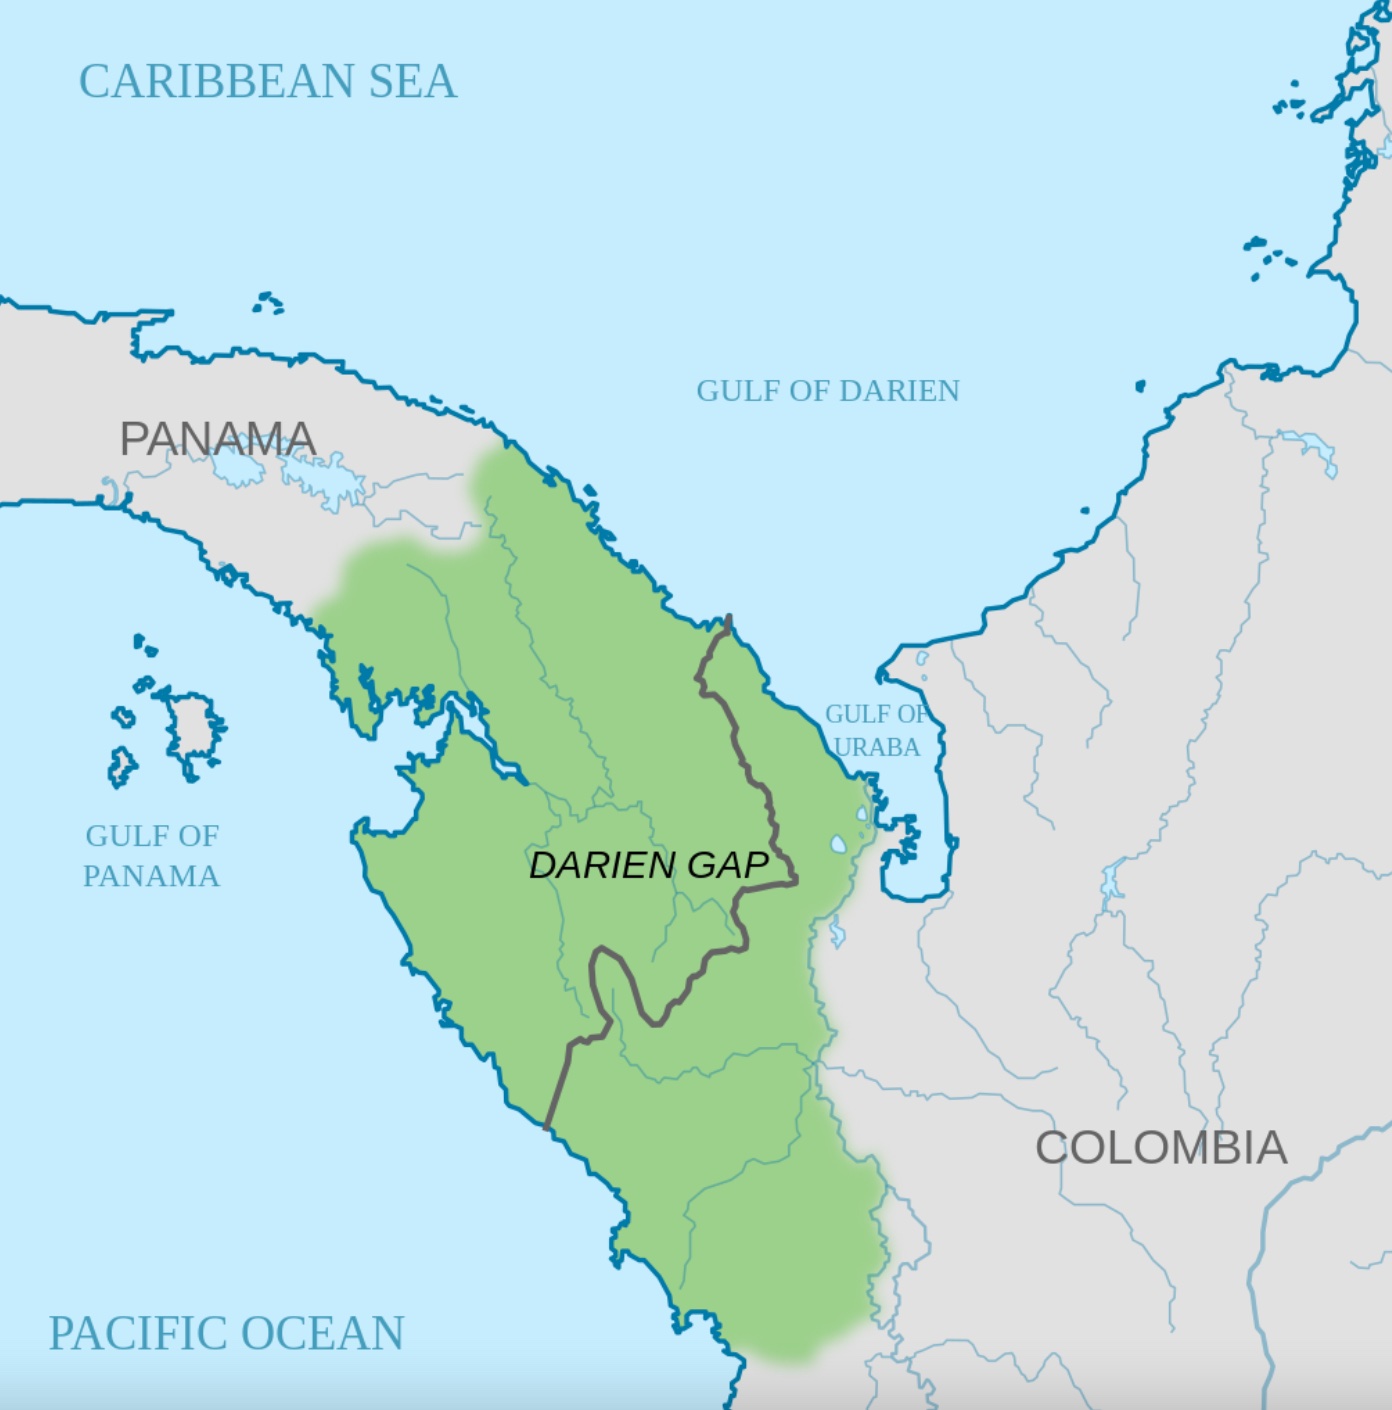 A map highlighting the pan American highway and the location of Panama.